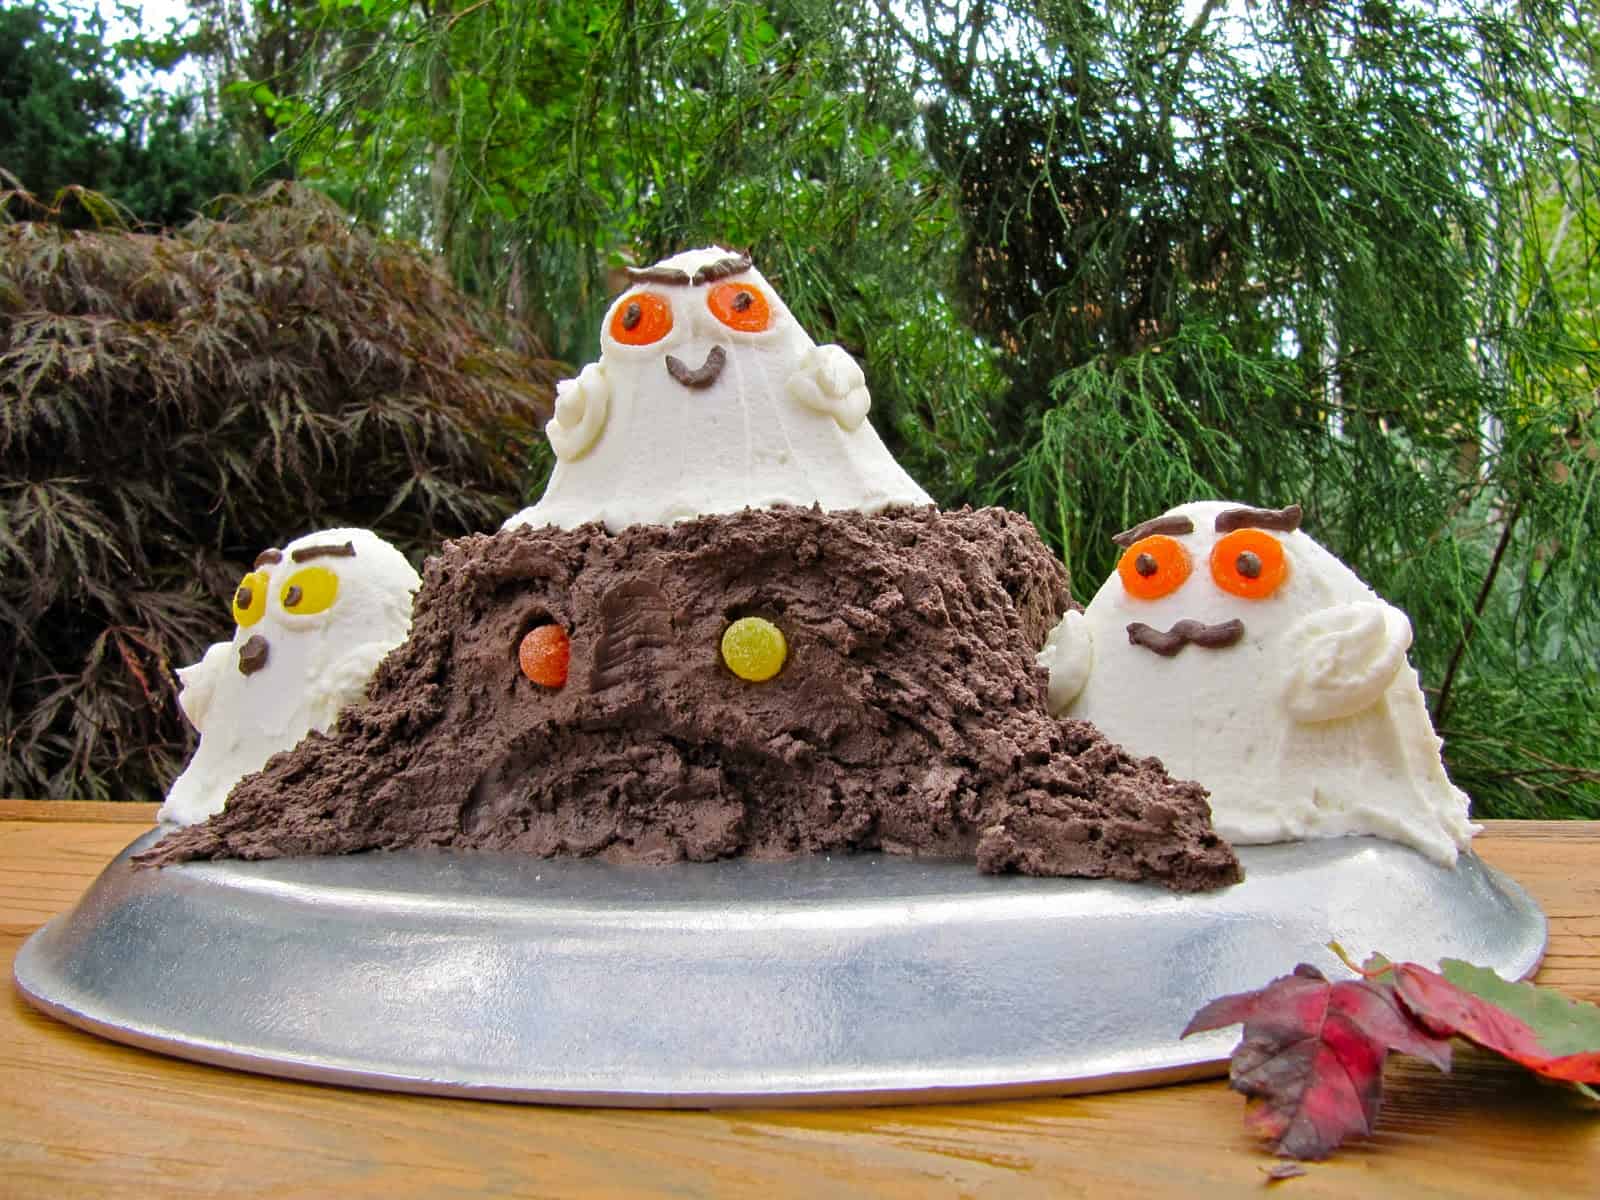 A Decadent Fudge Cake decorated with Buttercream Frosting to make a Haunted Halloween Forest Cake presented in an autumn garden.